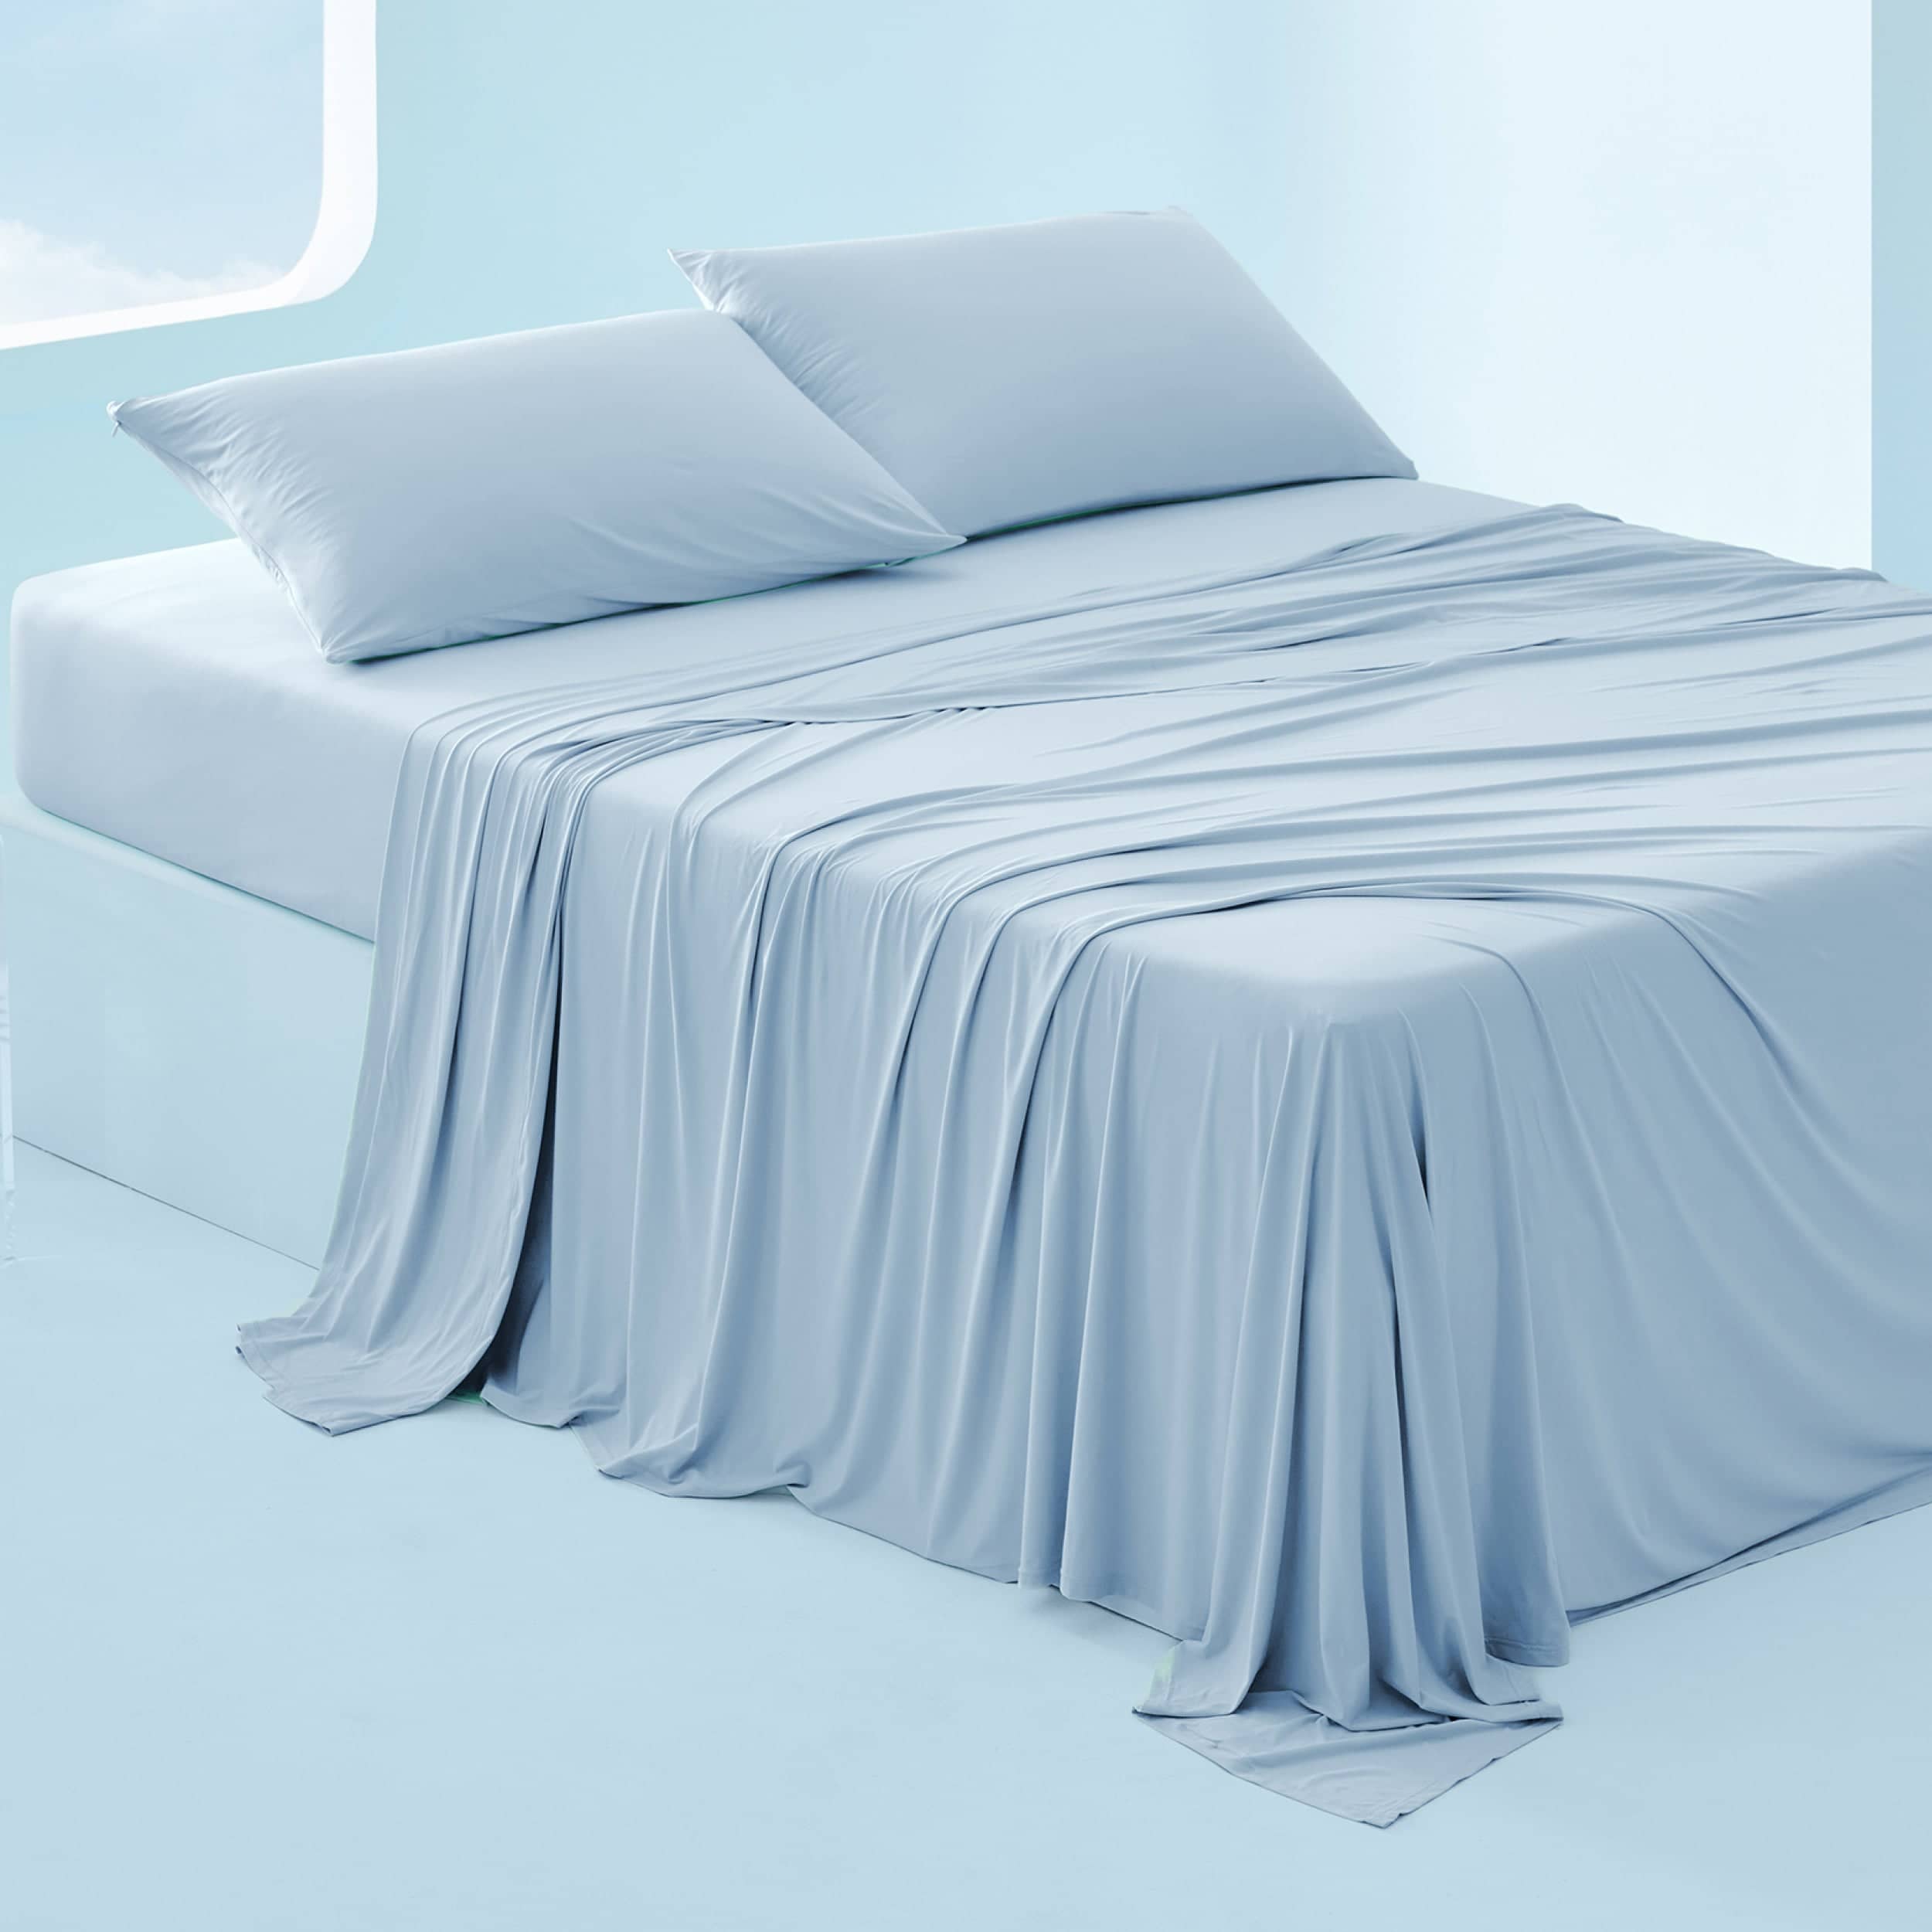 Bedsure Breescape Cooling Sheets, Cooling Sheets For Hot Sleeper, With a Deep Pocket Fits up to 17.5" Mattresses